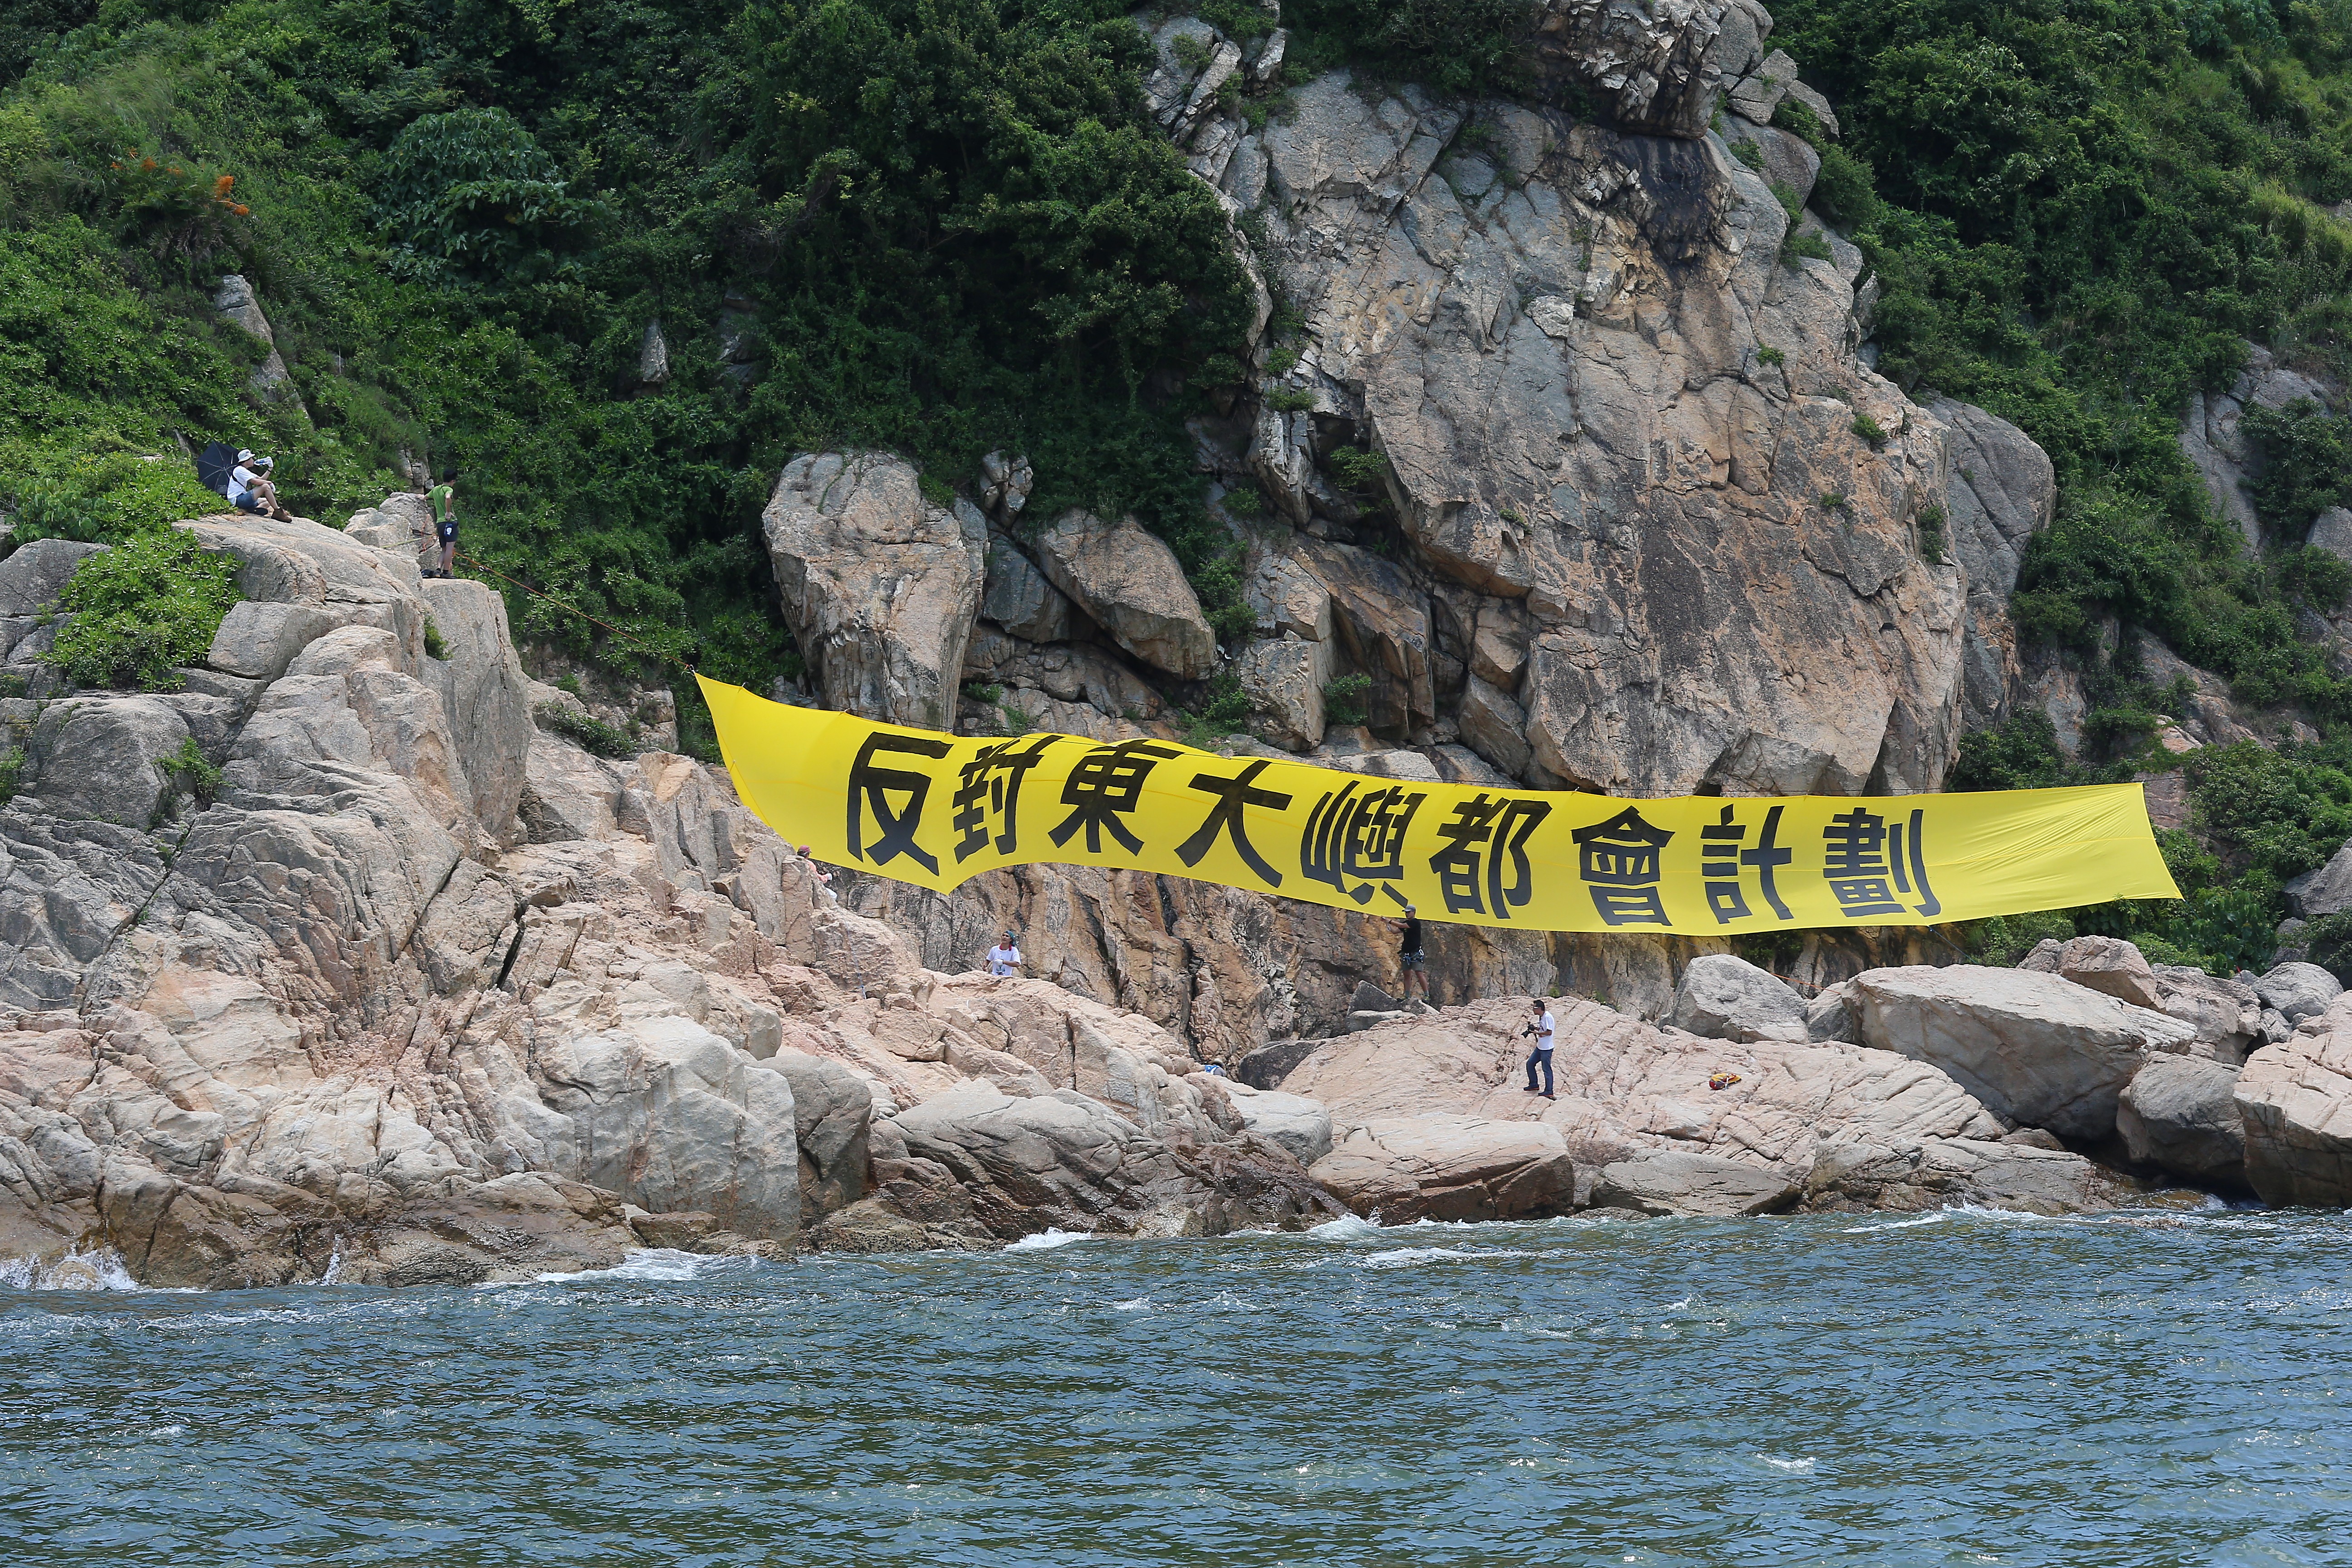 A banner at Kau Yi Chau calls for the East Lantau Metropolis plan to be dropped, on June 26 last year. Photo: K. Y. Cheng